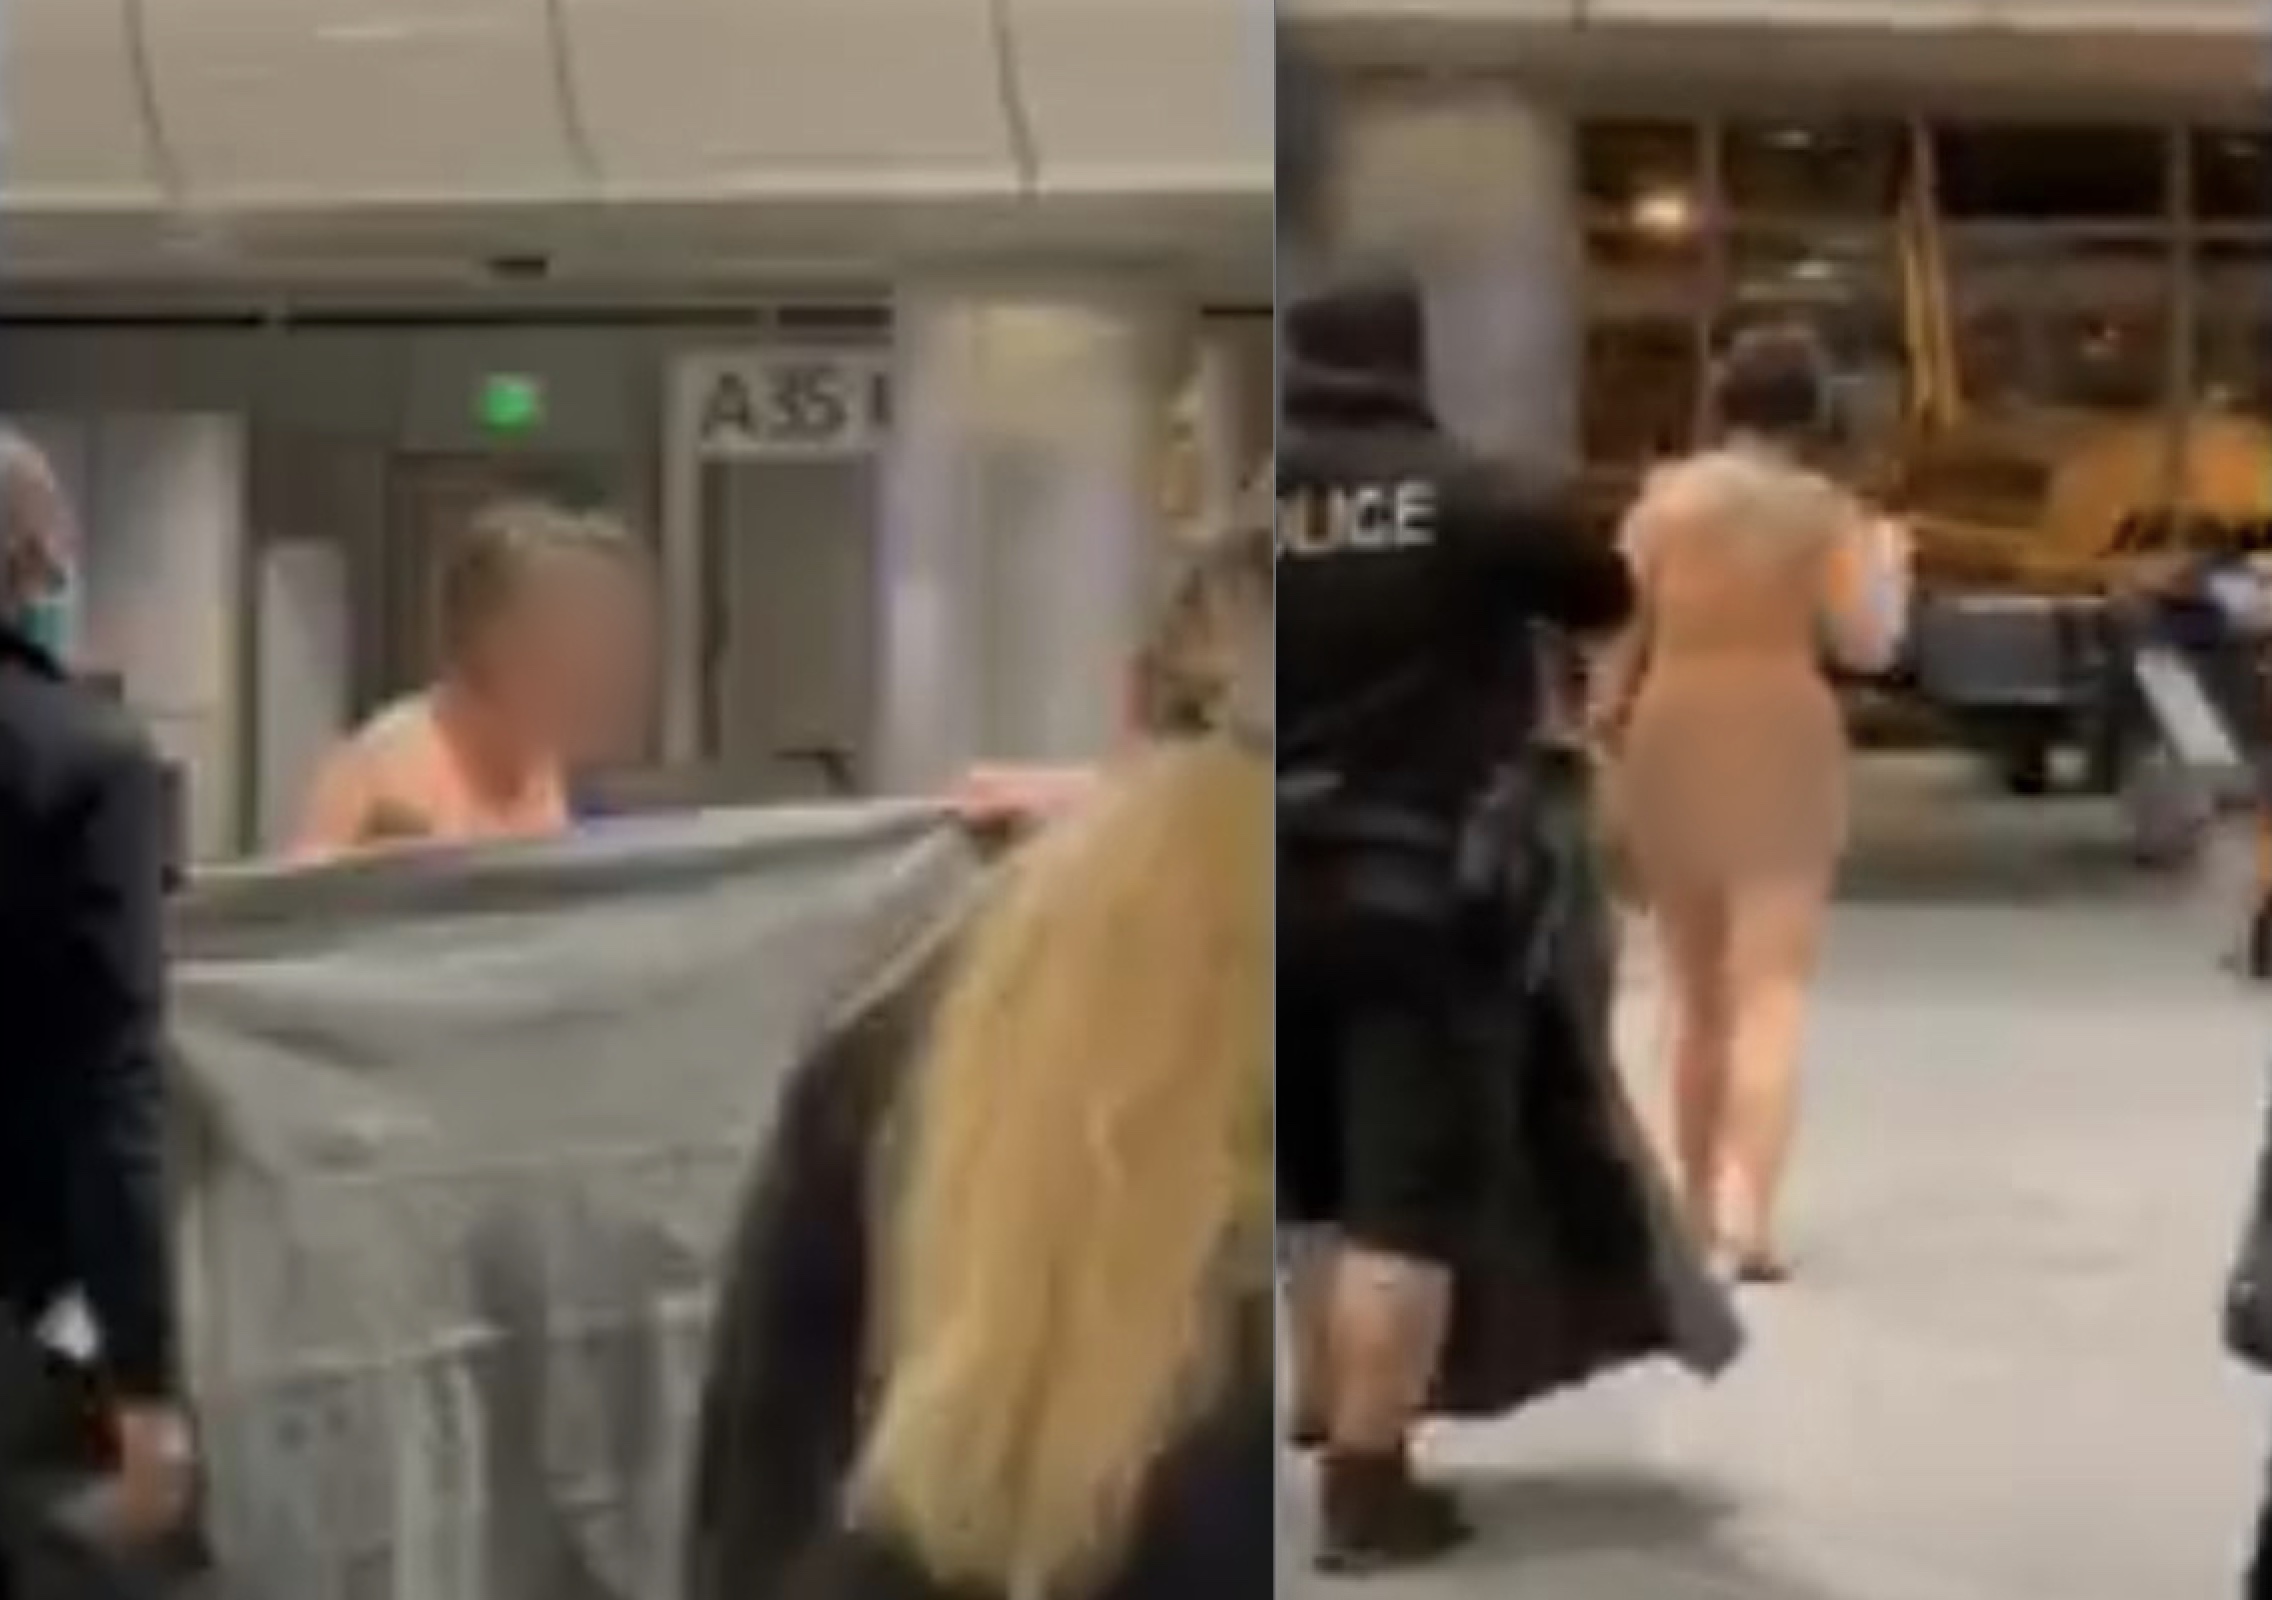 Naked Female At Denver International Airport Walked Around Concourse A Asking Passengers ‘Where Are You From?’